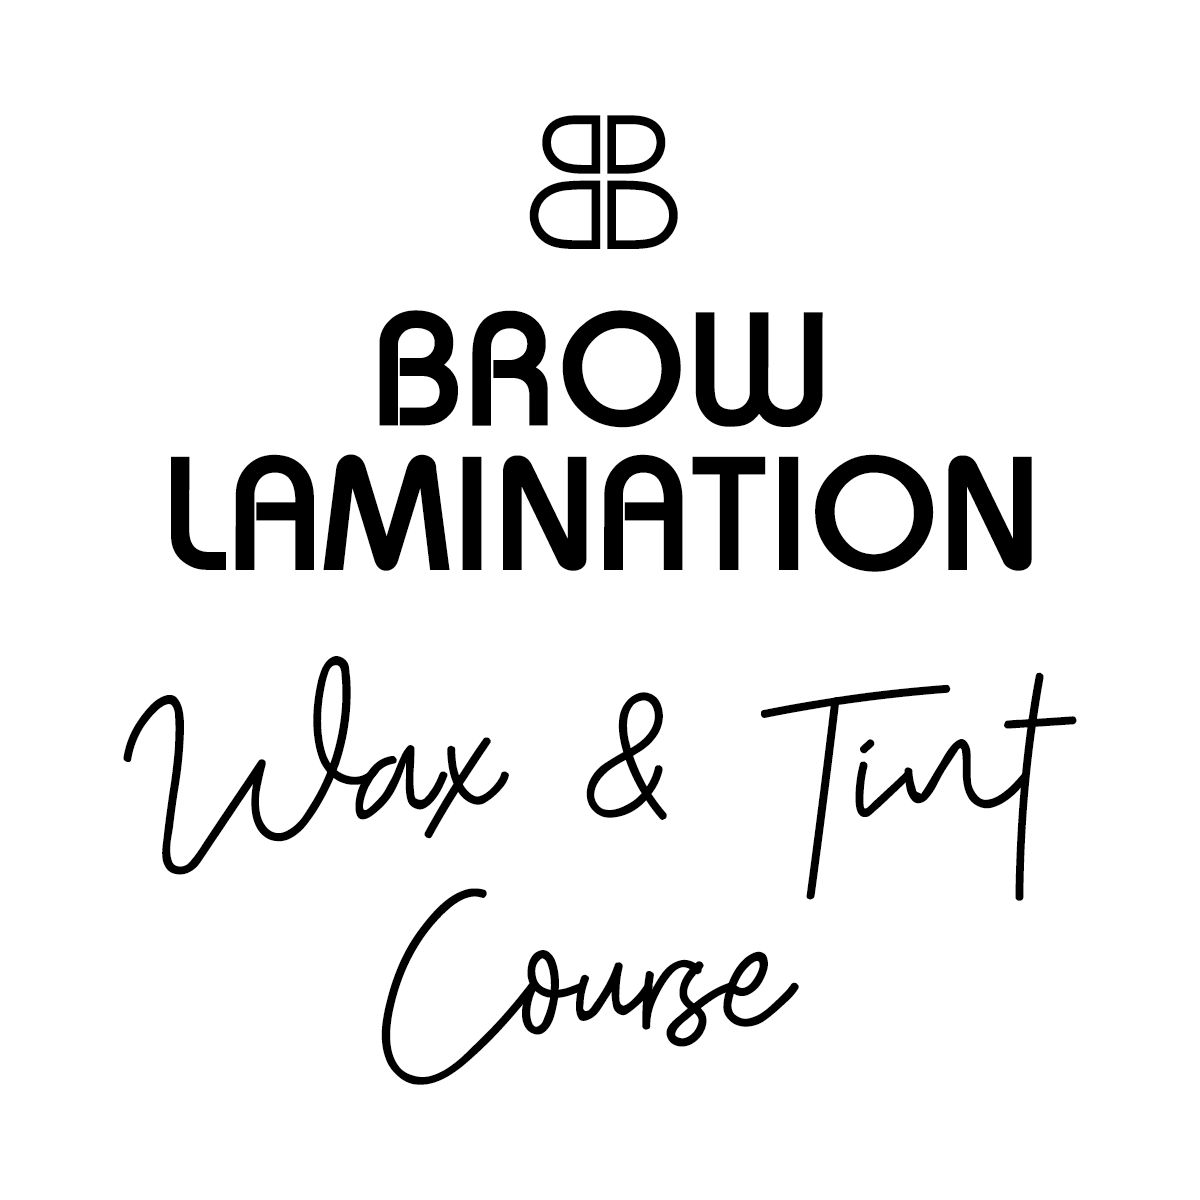 Brow Lamination, Waxing & Tinting Course - Liverpool HQ